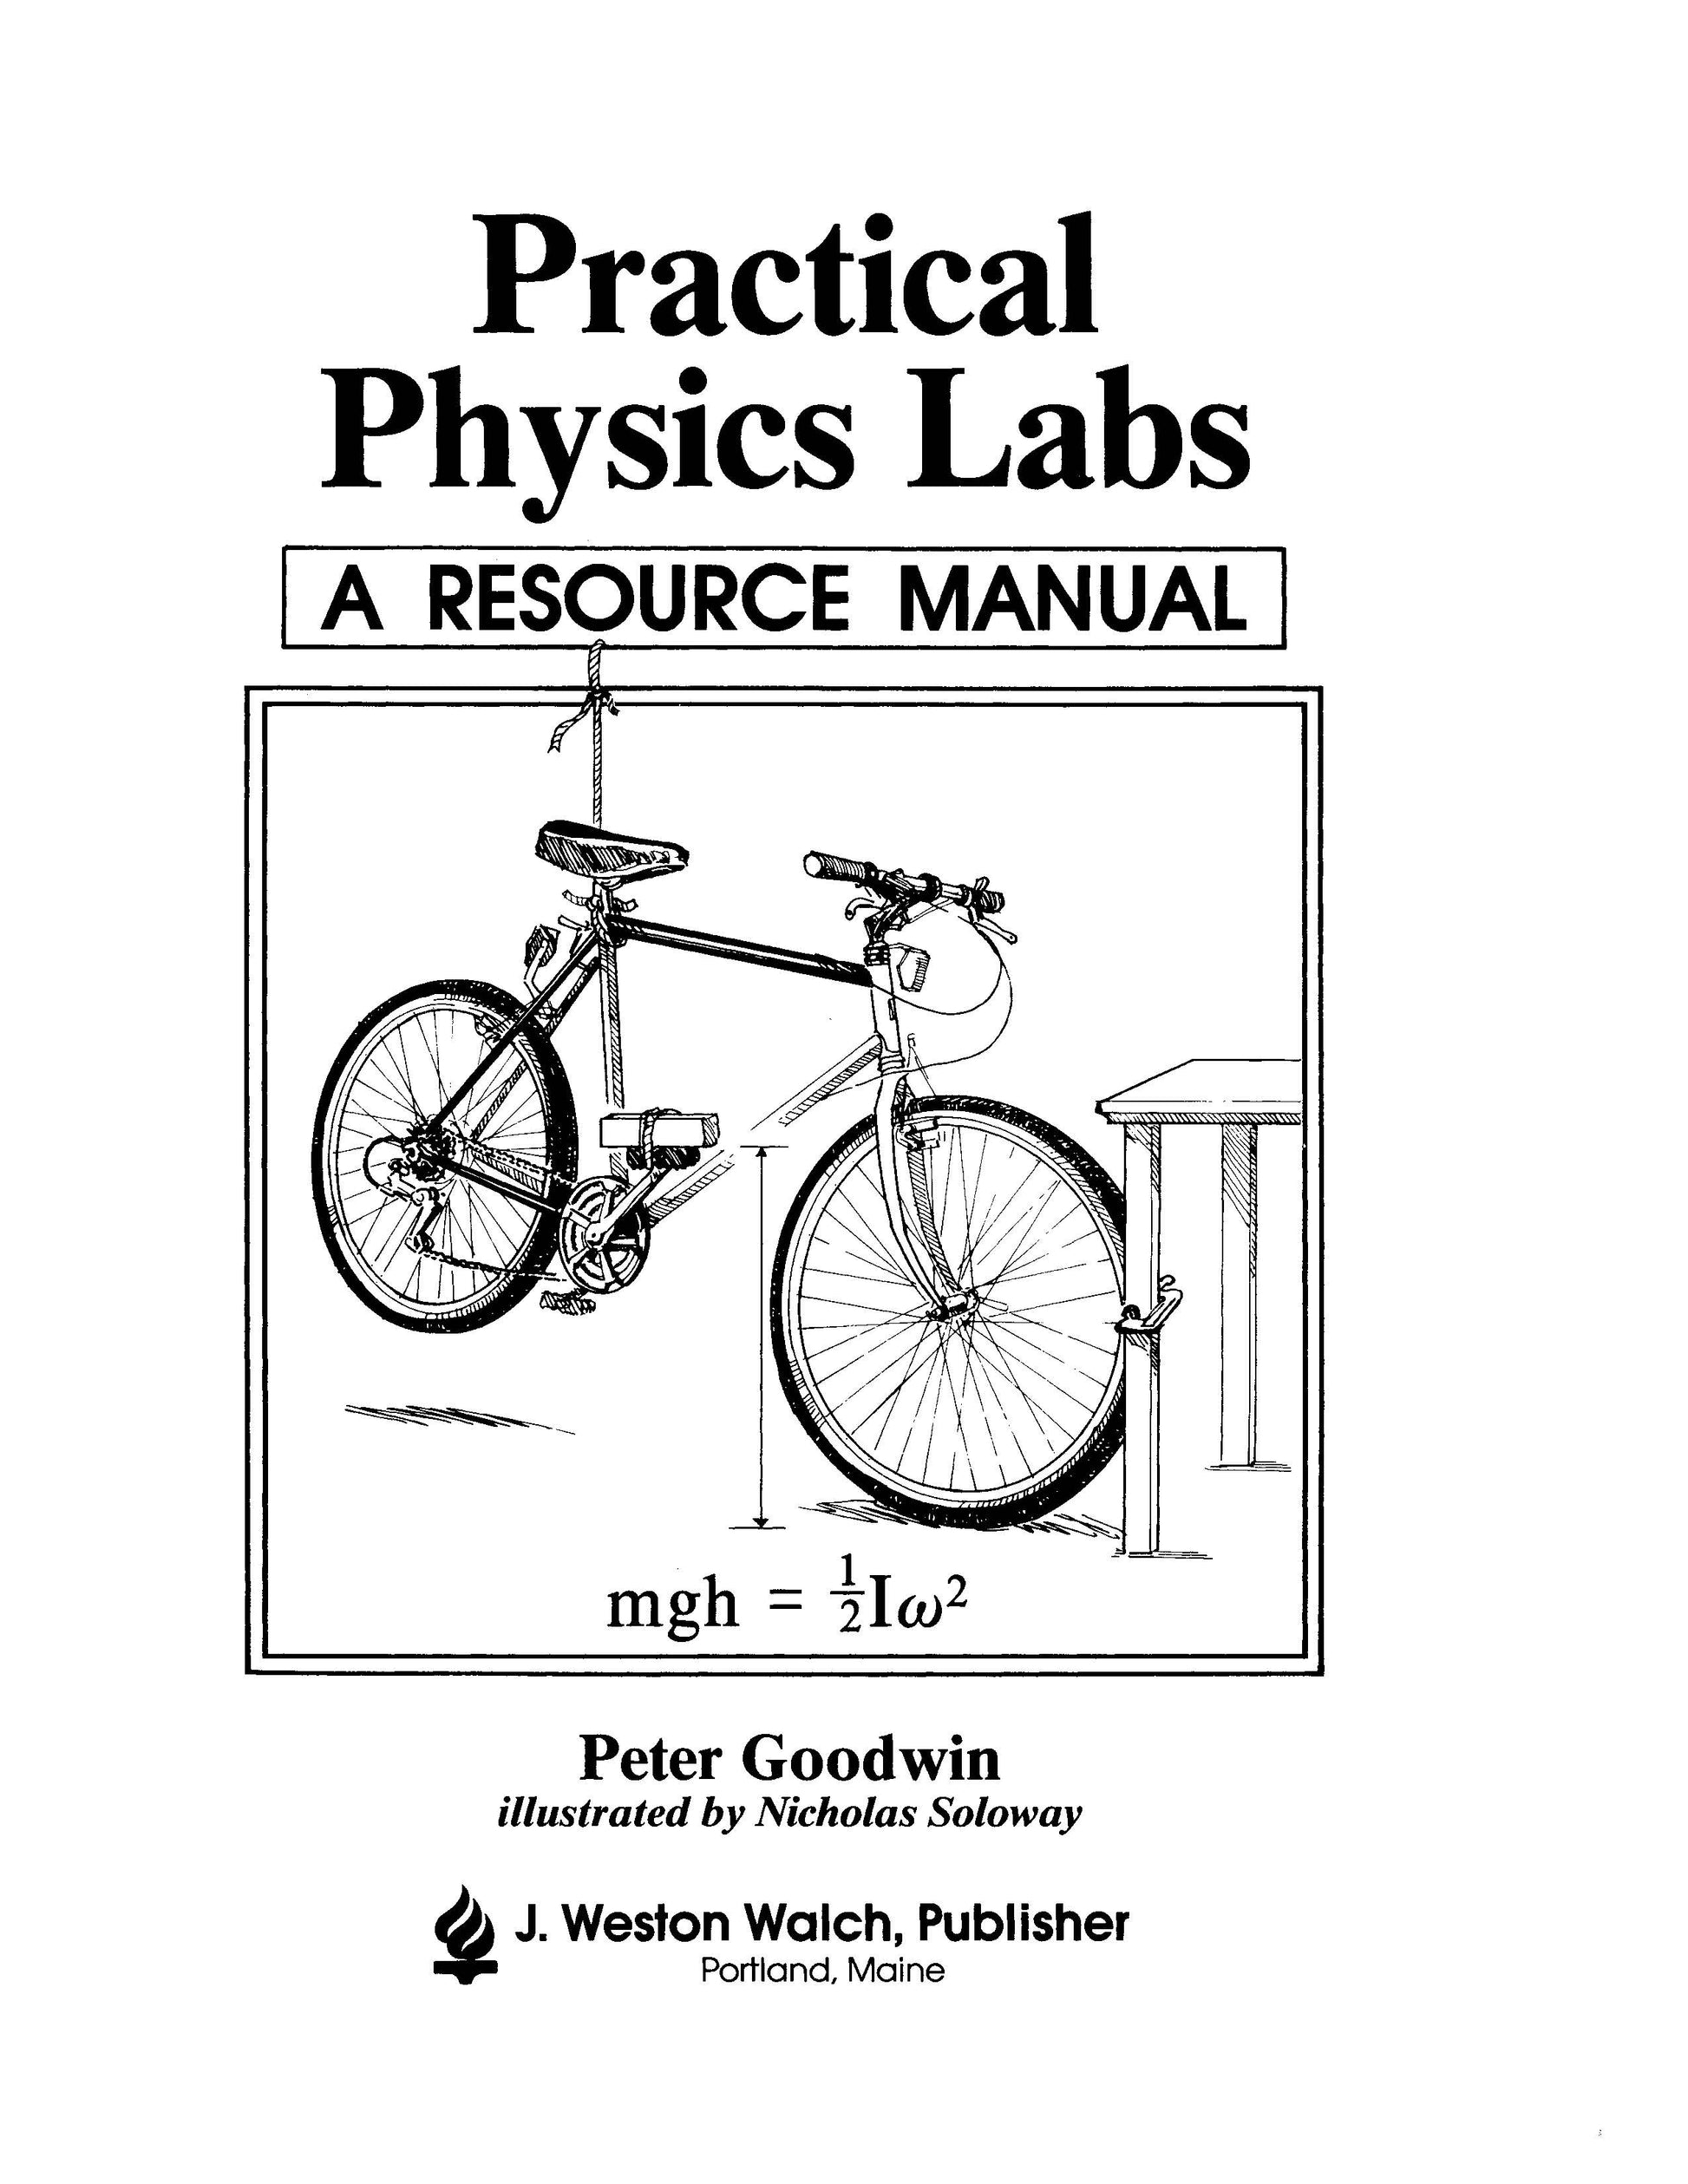 Practical Physics Labs, Science, Biology, Physics, Chemistry, Earth Science, Teaching Resources, Book, Bright Education Australia